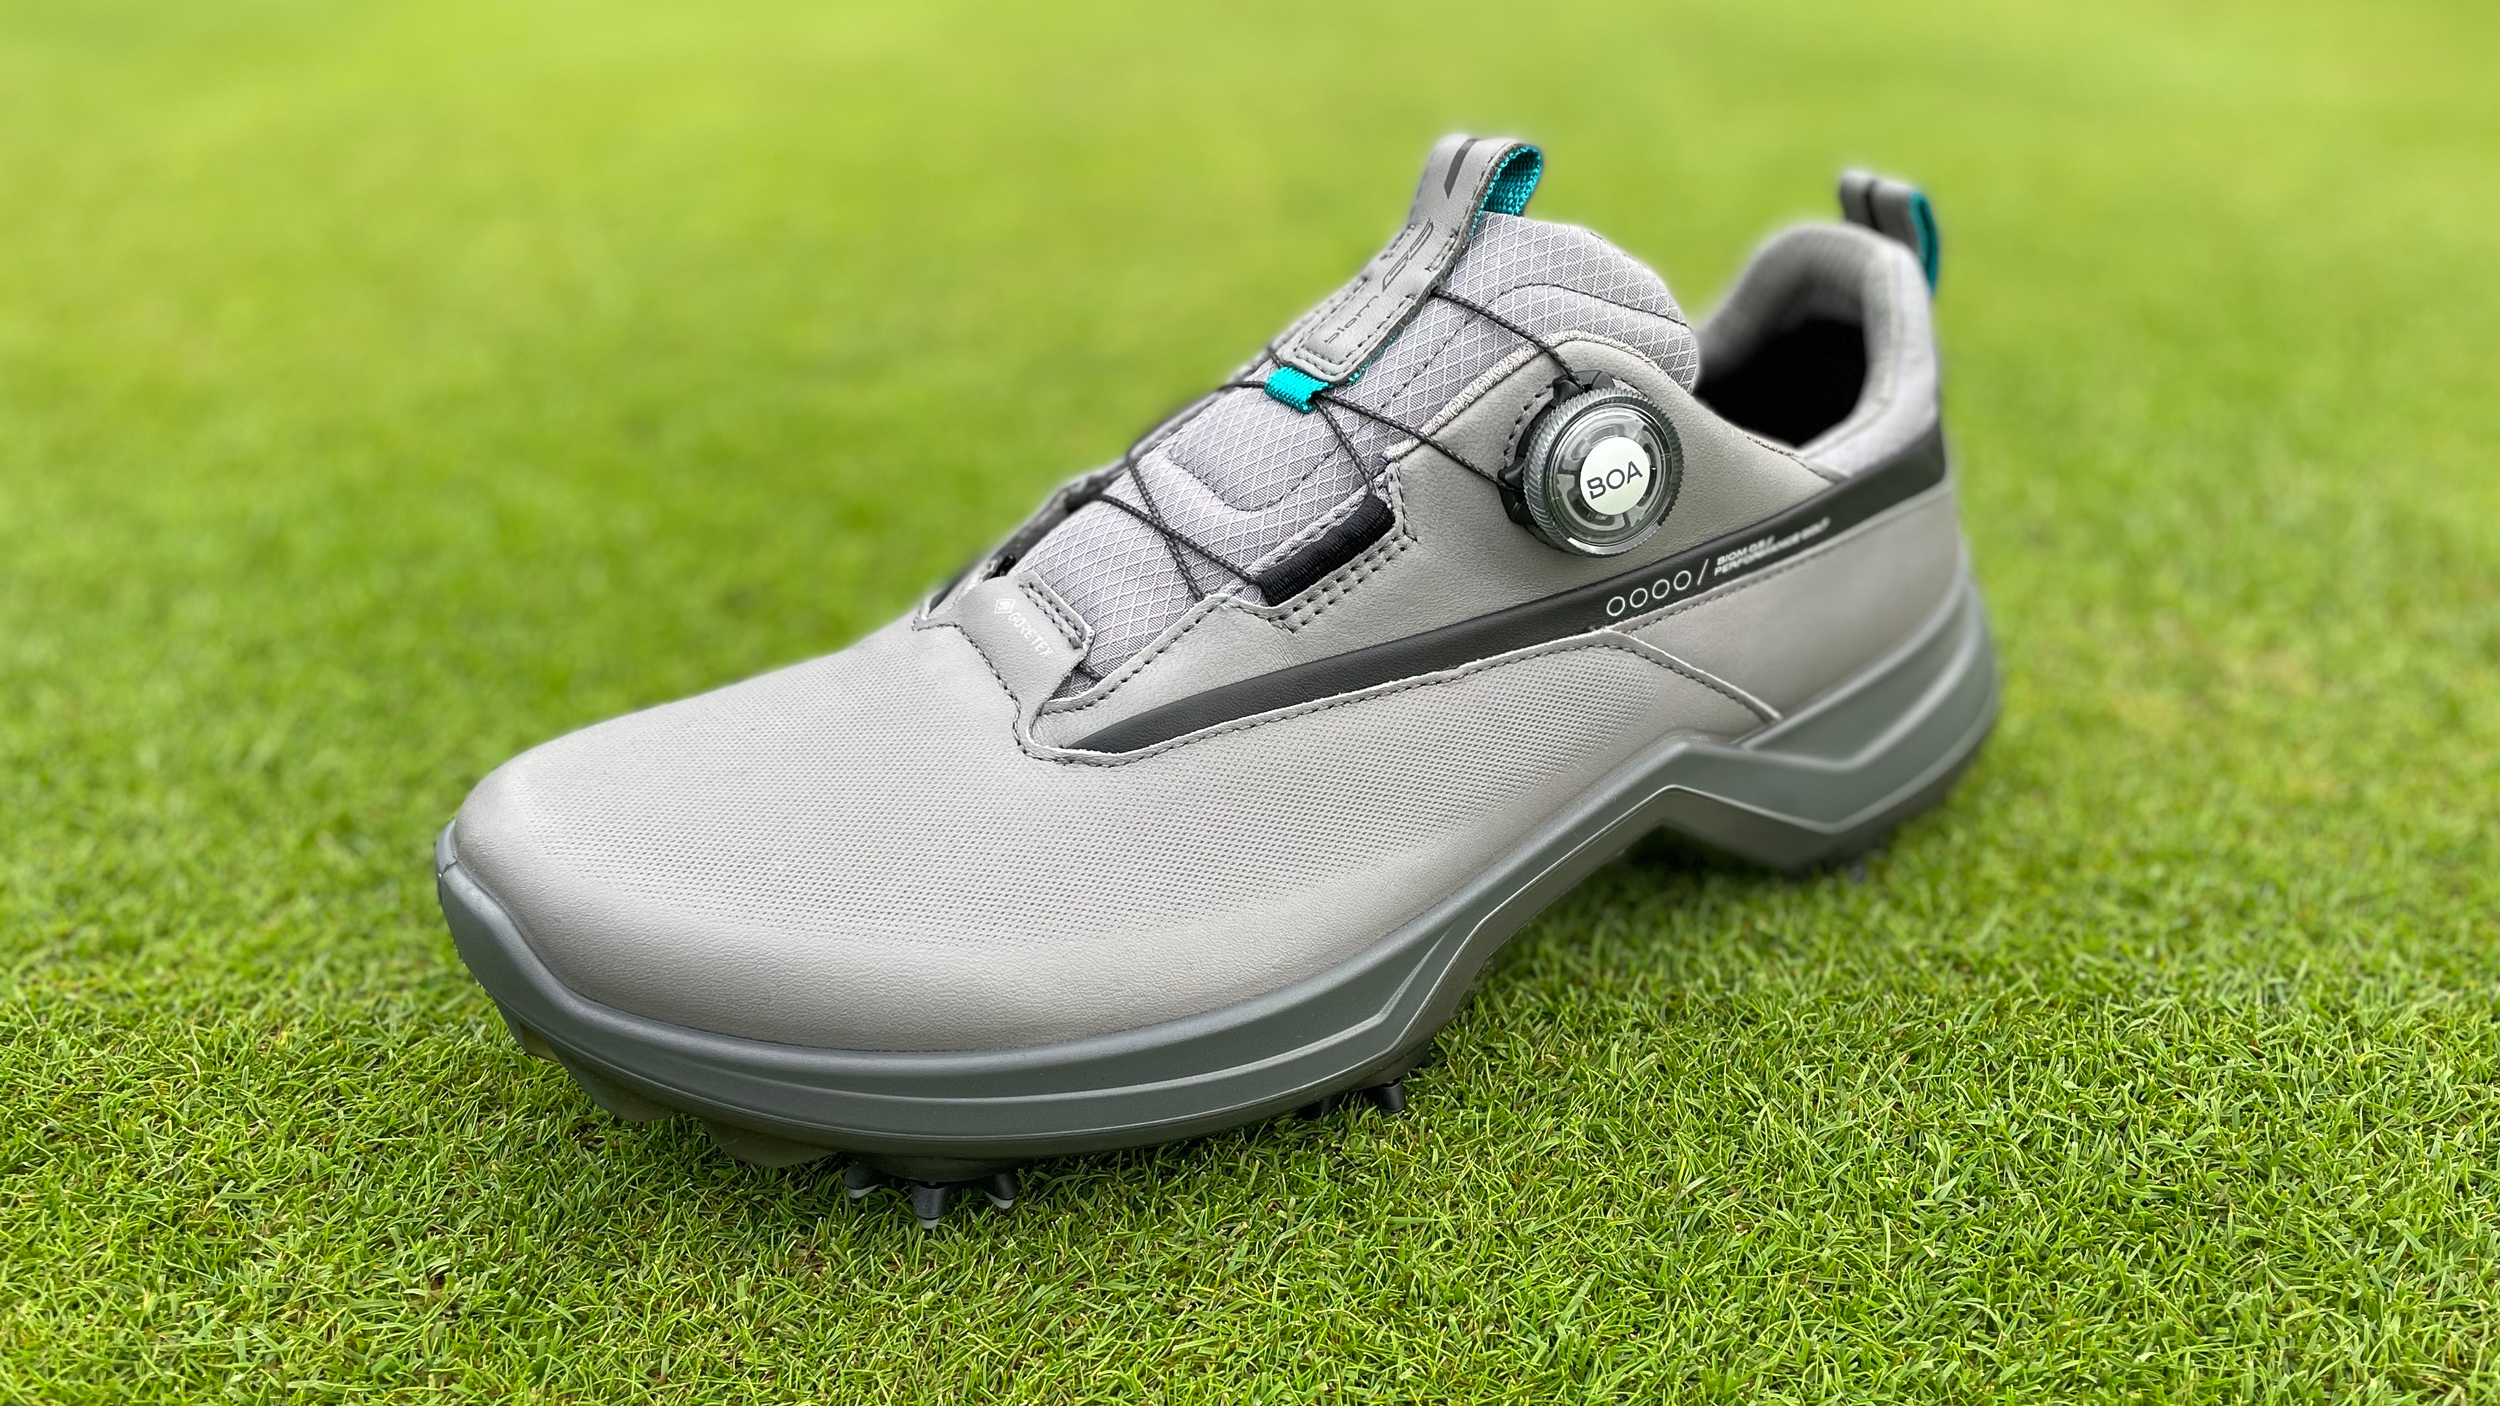 Ecco Biom G5 Shoe Review | Golf Monthly